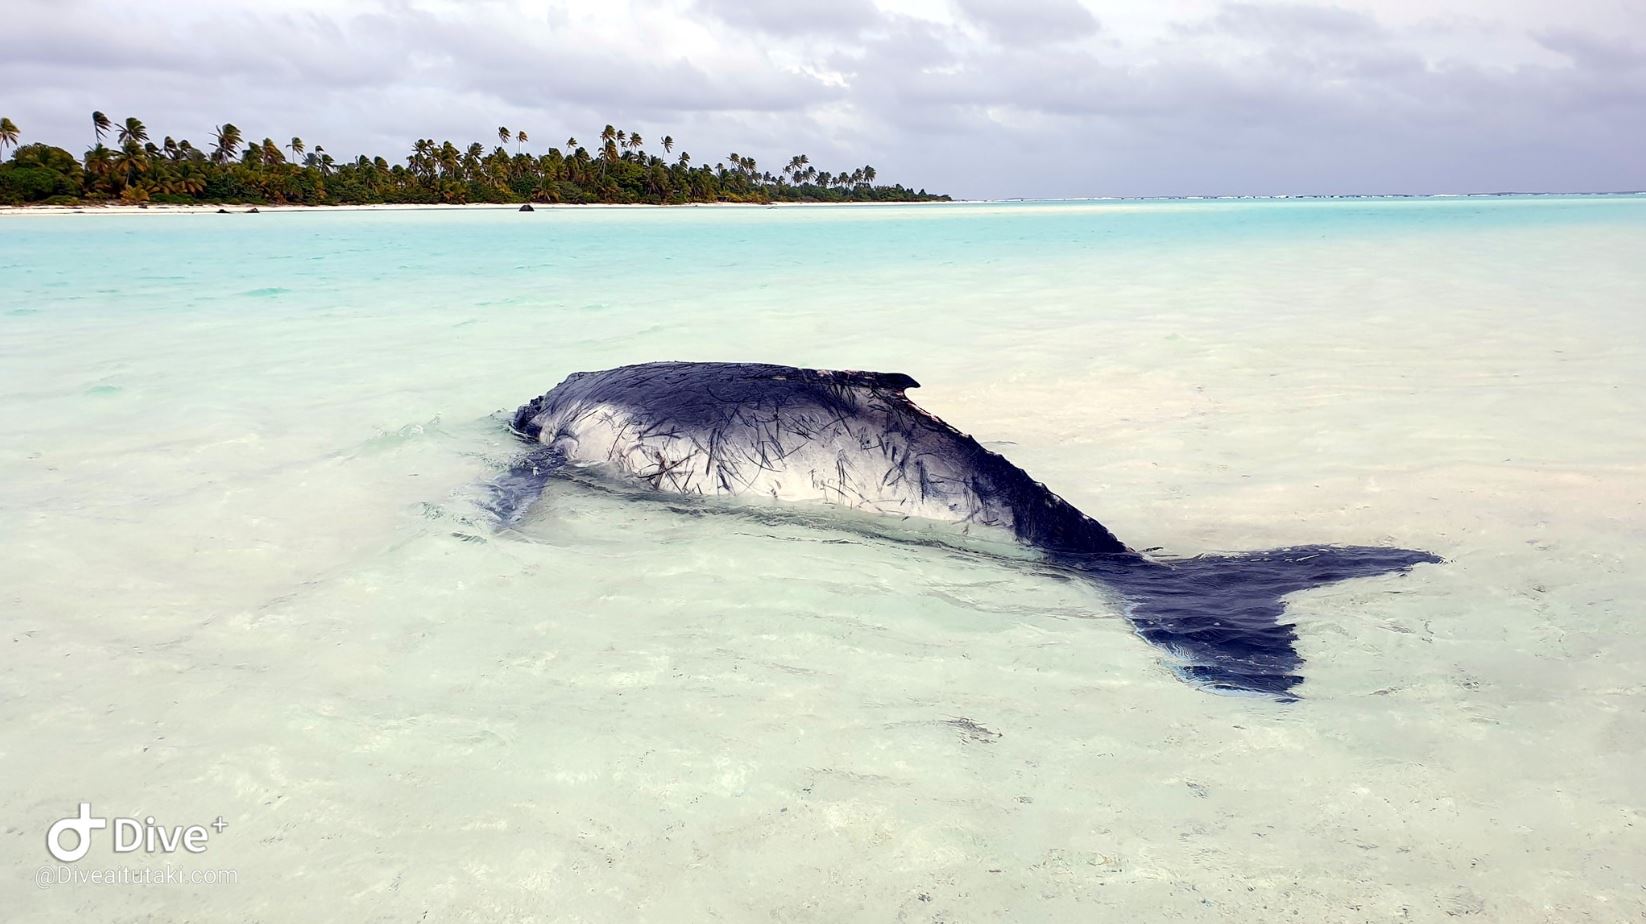 Sad ending to save beached baby whale